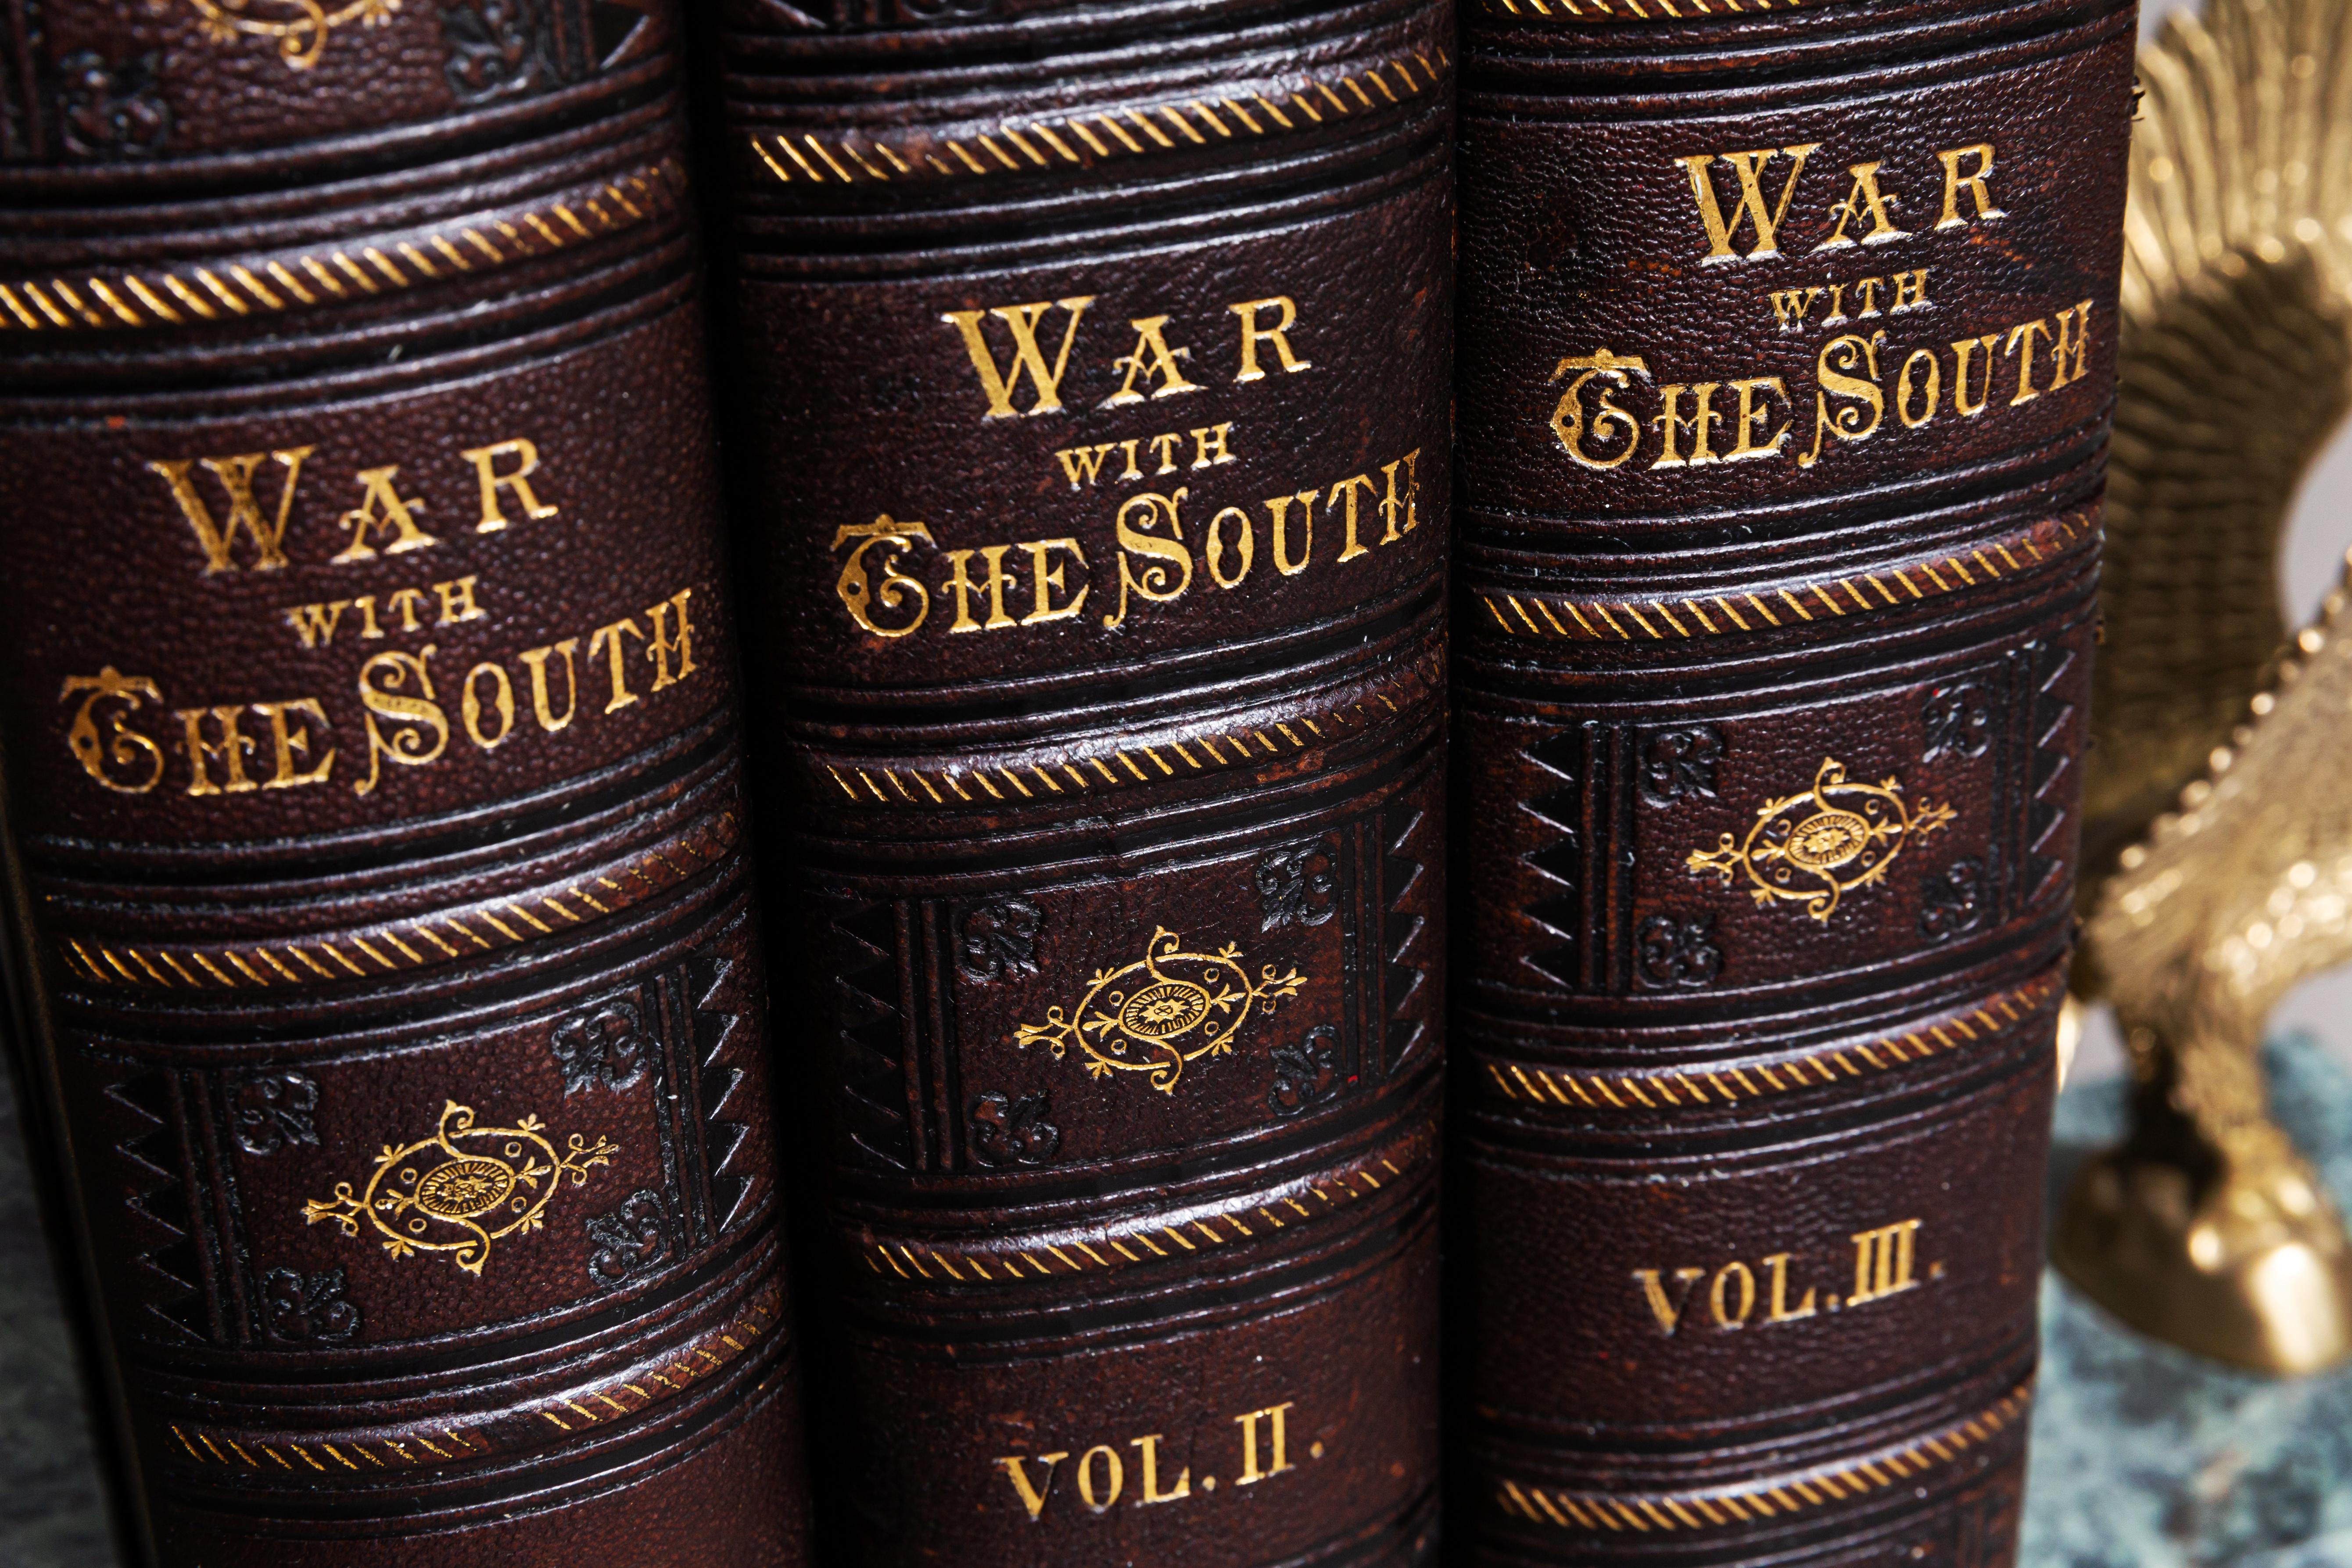 The War With The South. A History of The Late Rebellion. With
Biographical Sketches of Leading Statesmen, and Distinguished Naval, Military Commanders
etc.

Bound in 3/4 brown Morocco, cloth boards, all edges gilt, raised bands, gilt on